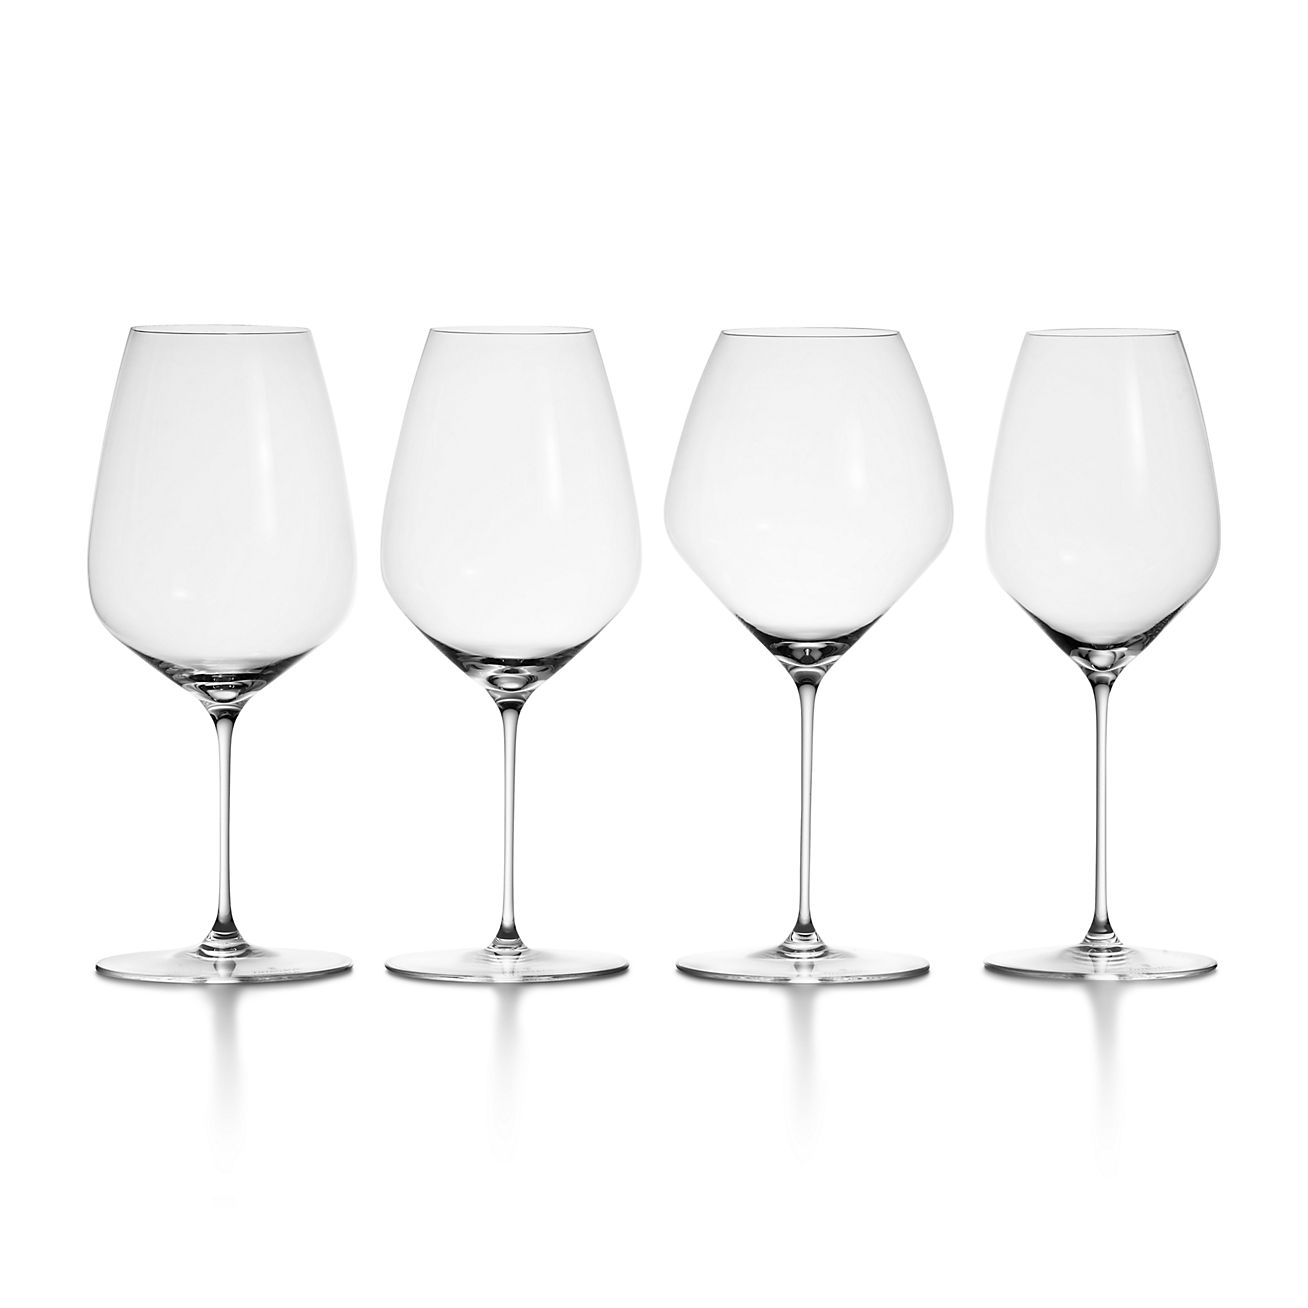 Tiffany Home Essentials White Wine Glasses in Crystal Glass, Set of Two